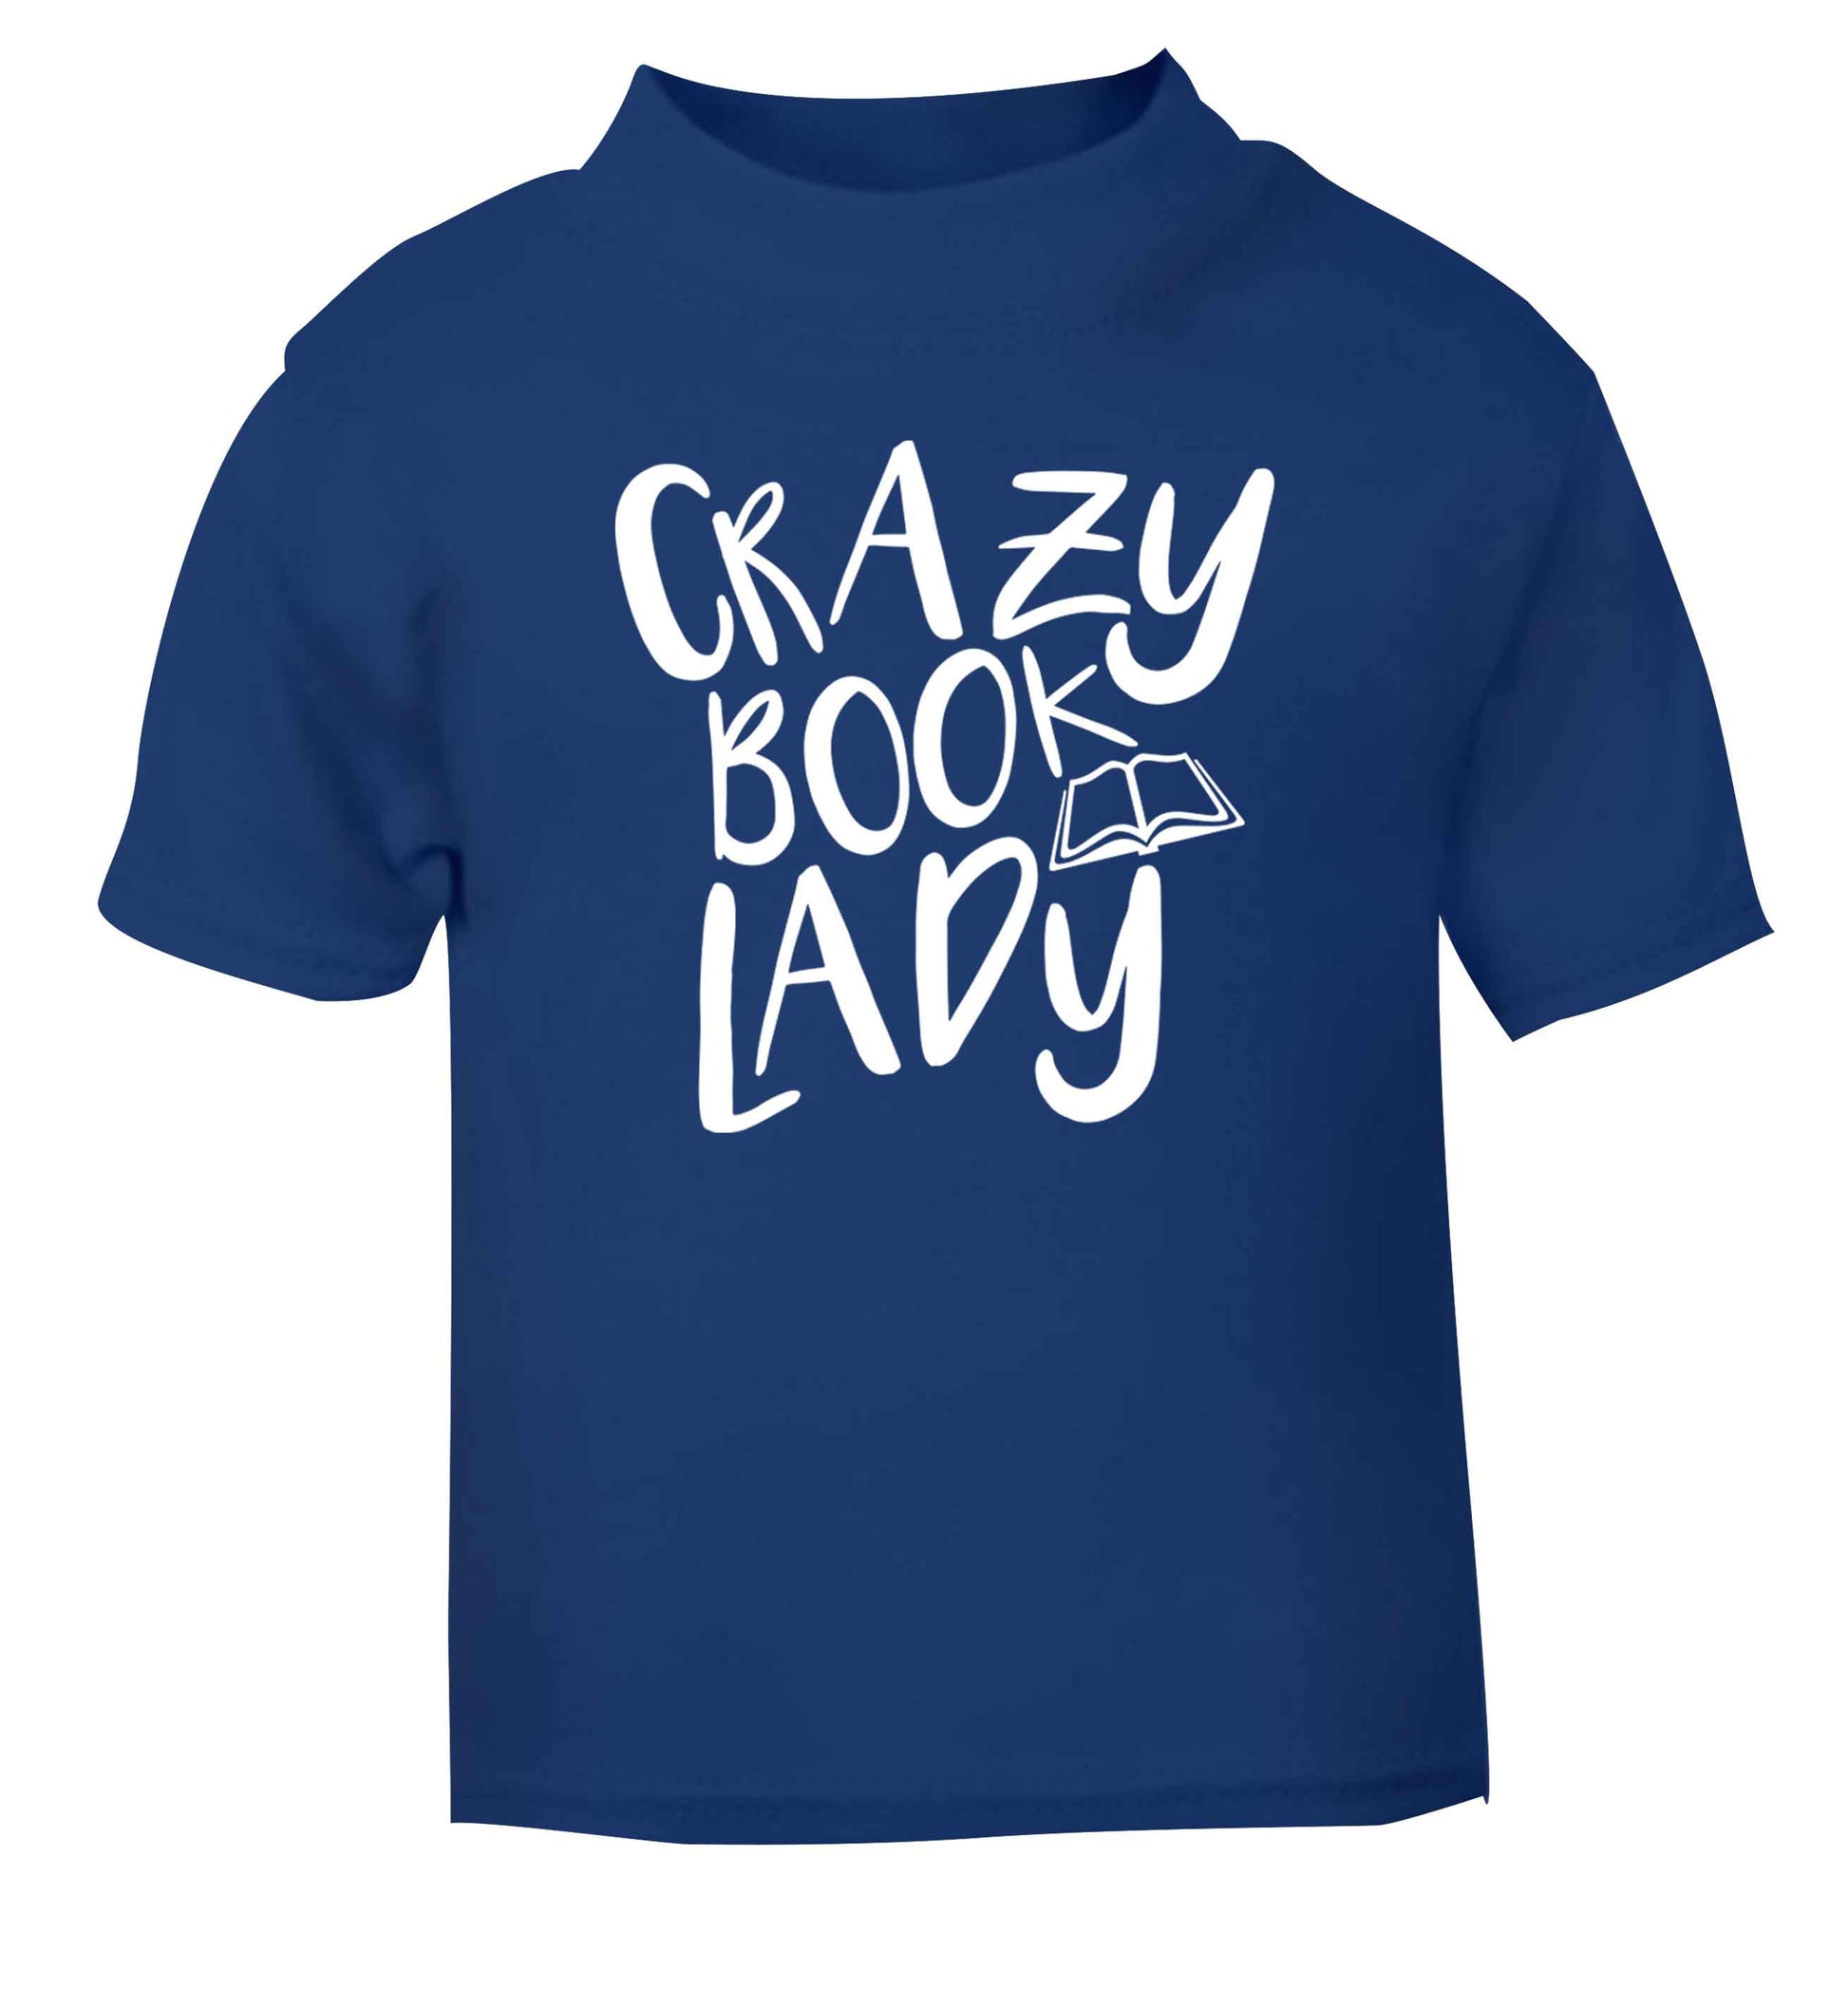 Crazy book lady blue Baby Toddler Tshirt 2 Years